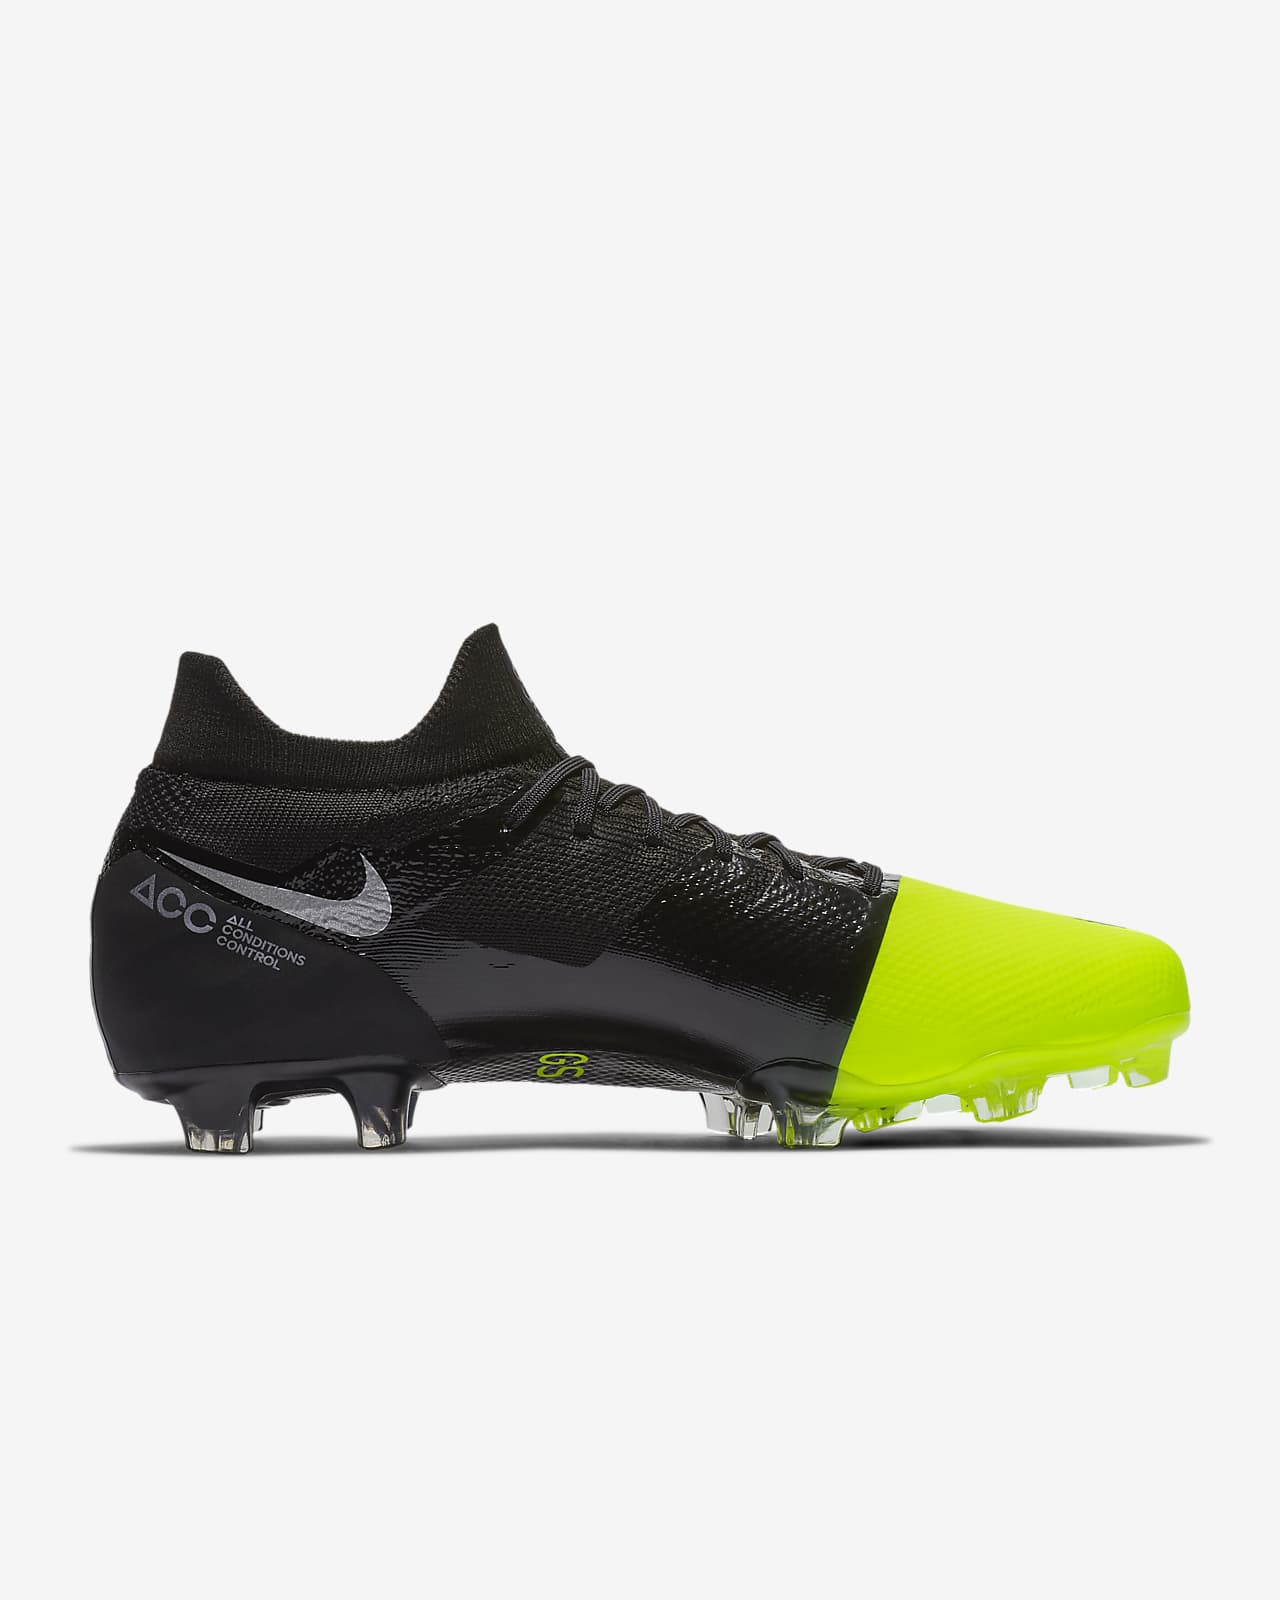 nike mercurial gs 360 limited edition